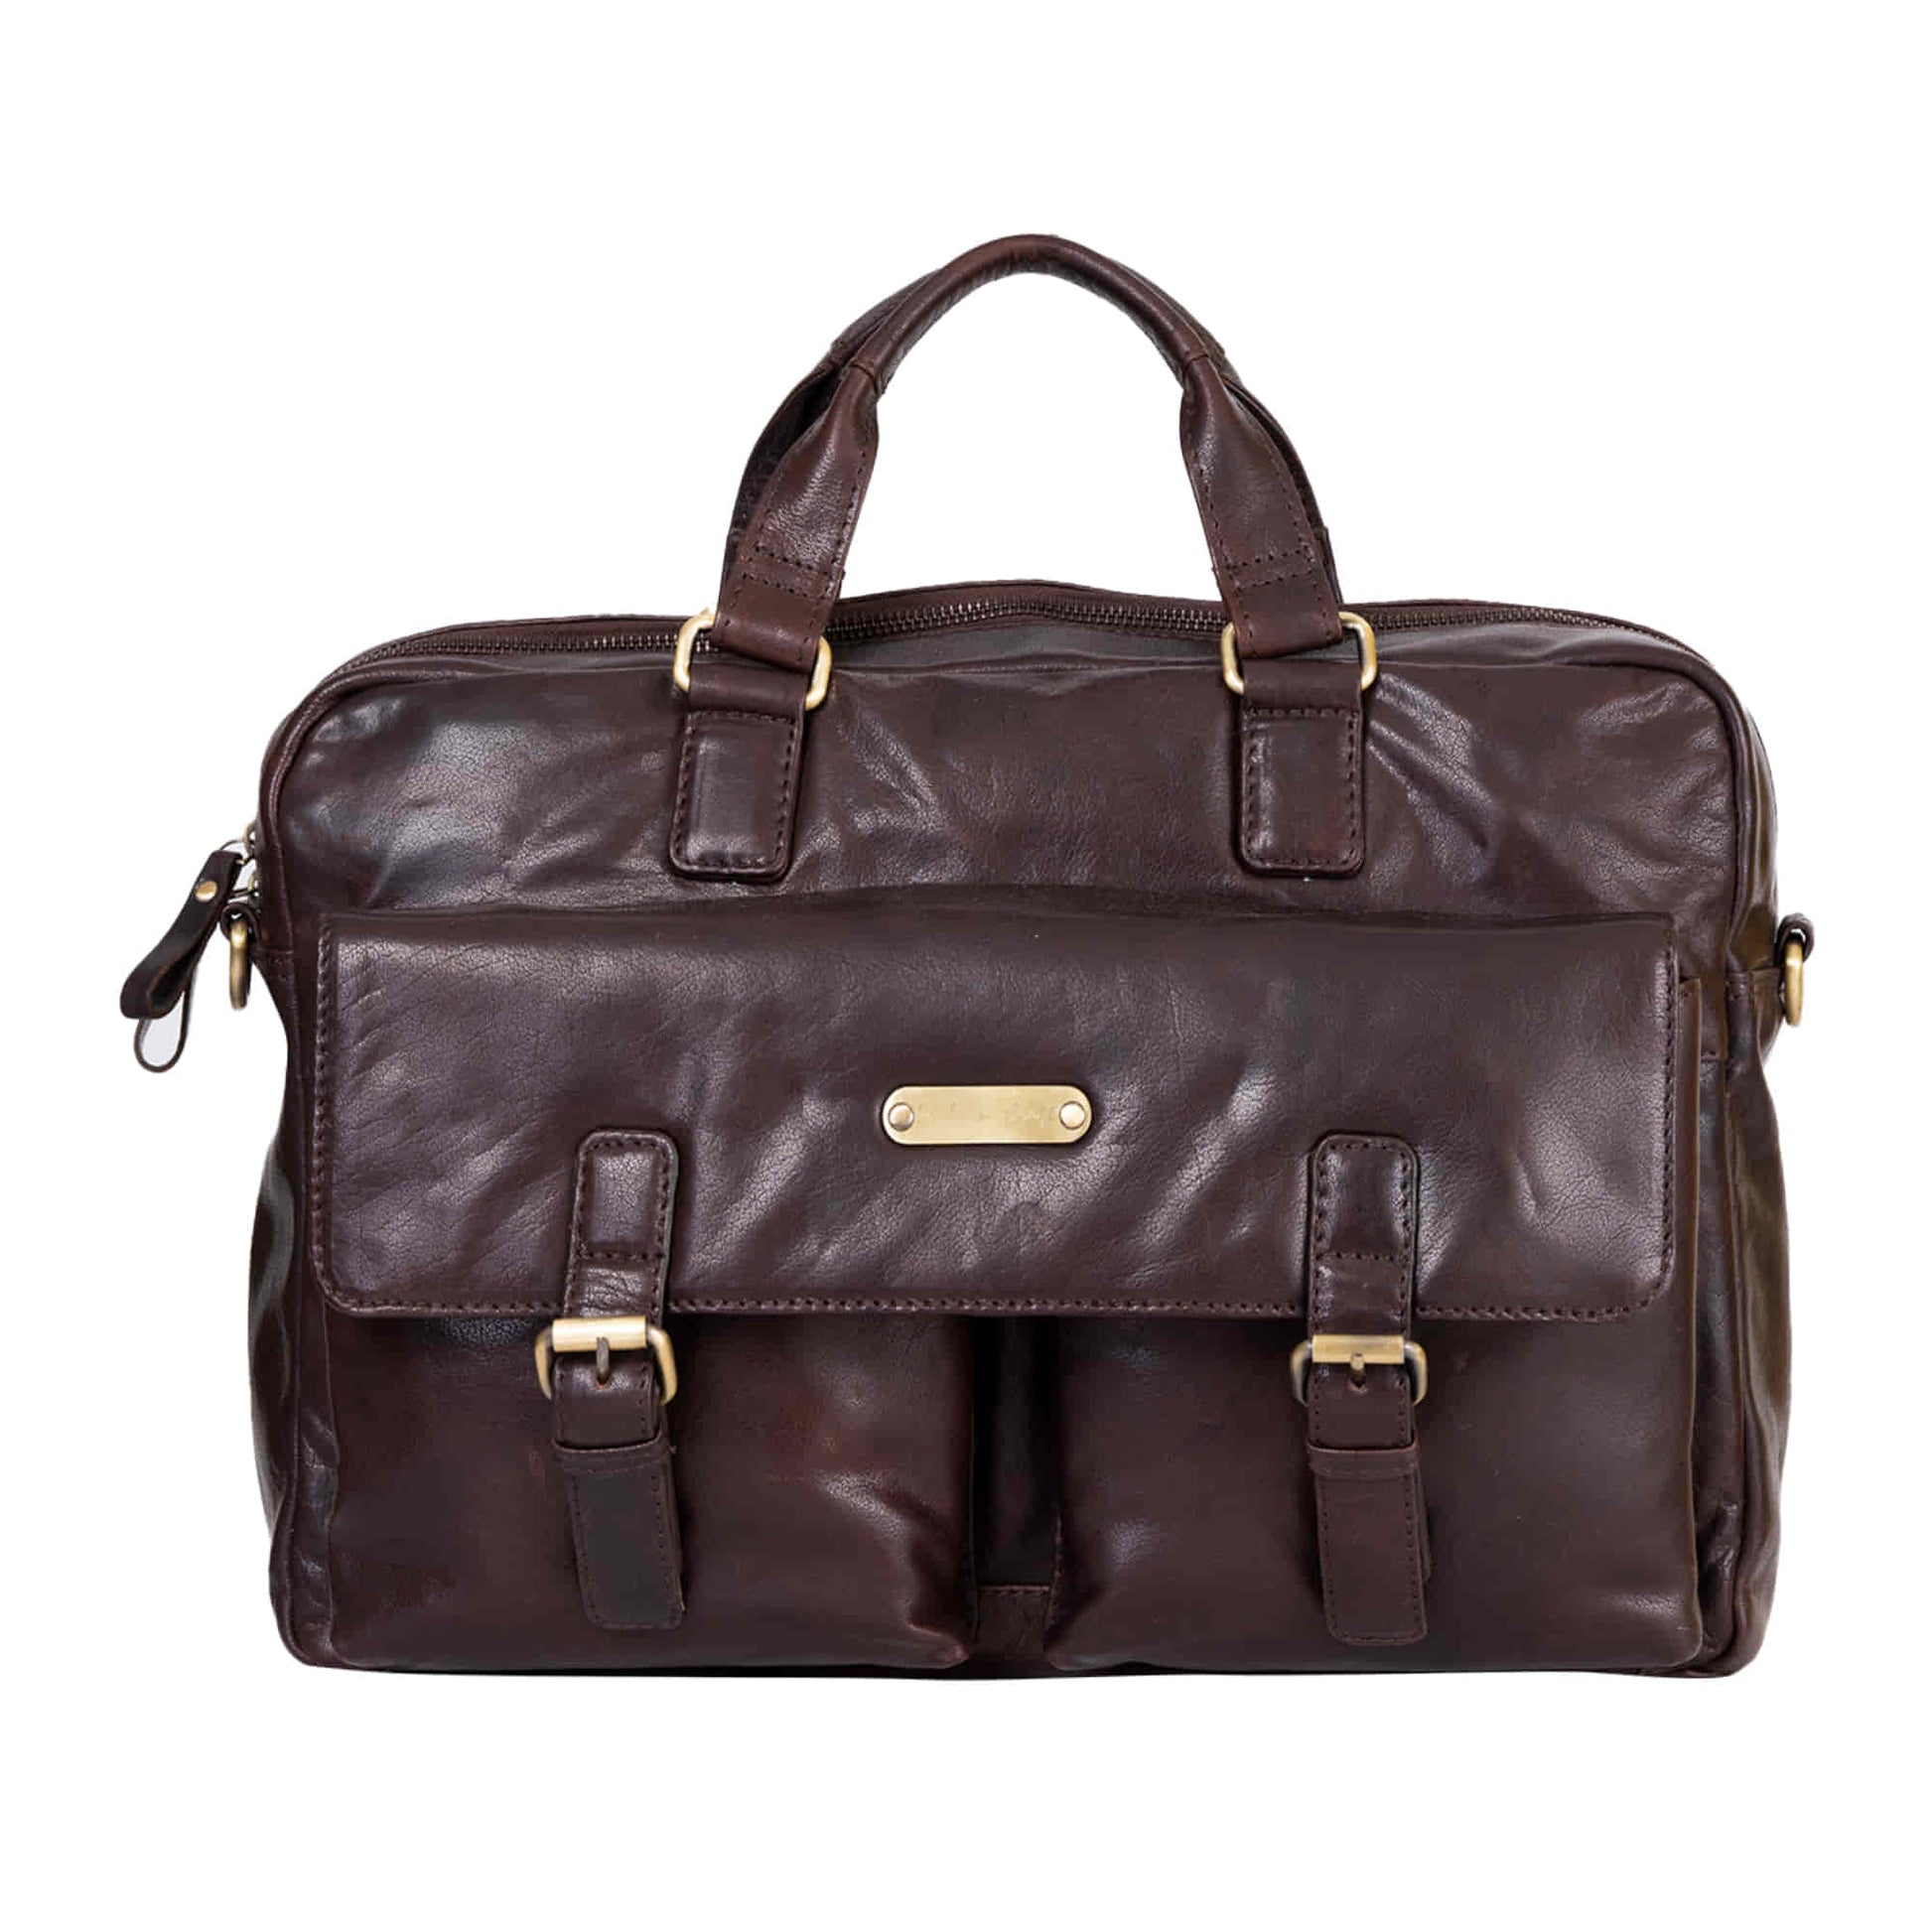 Style n Craft 392500 Cross Body Messenger Bag in Full Grain Dark Brown Vintage Leather - Front View showing the top leather handles, the 2 front  pockets with the leather flap